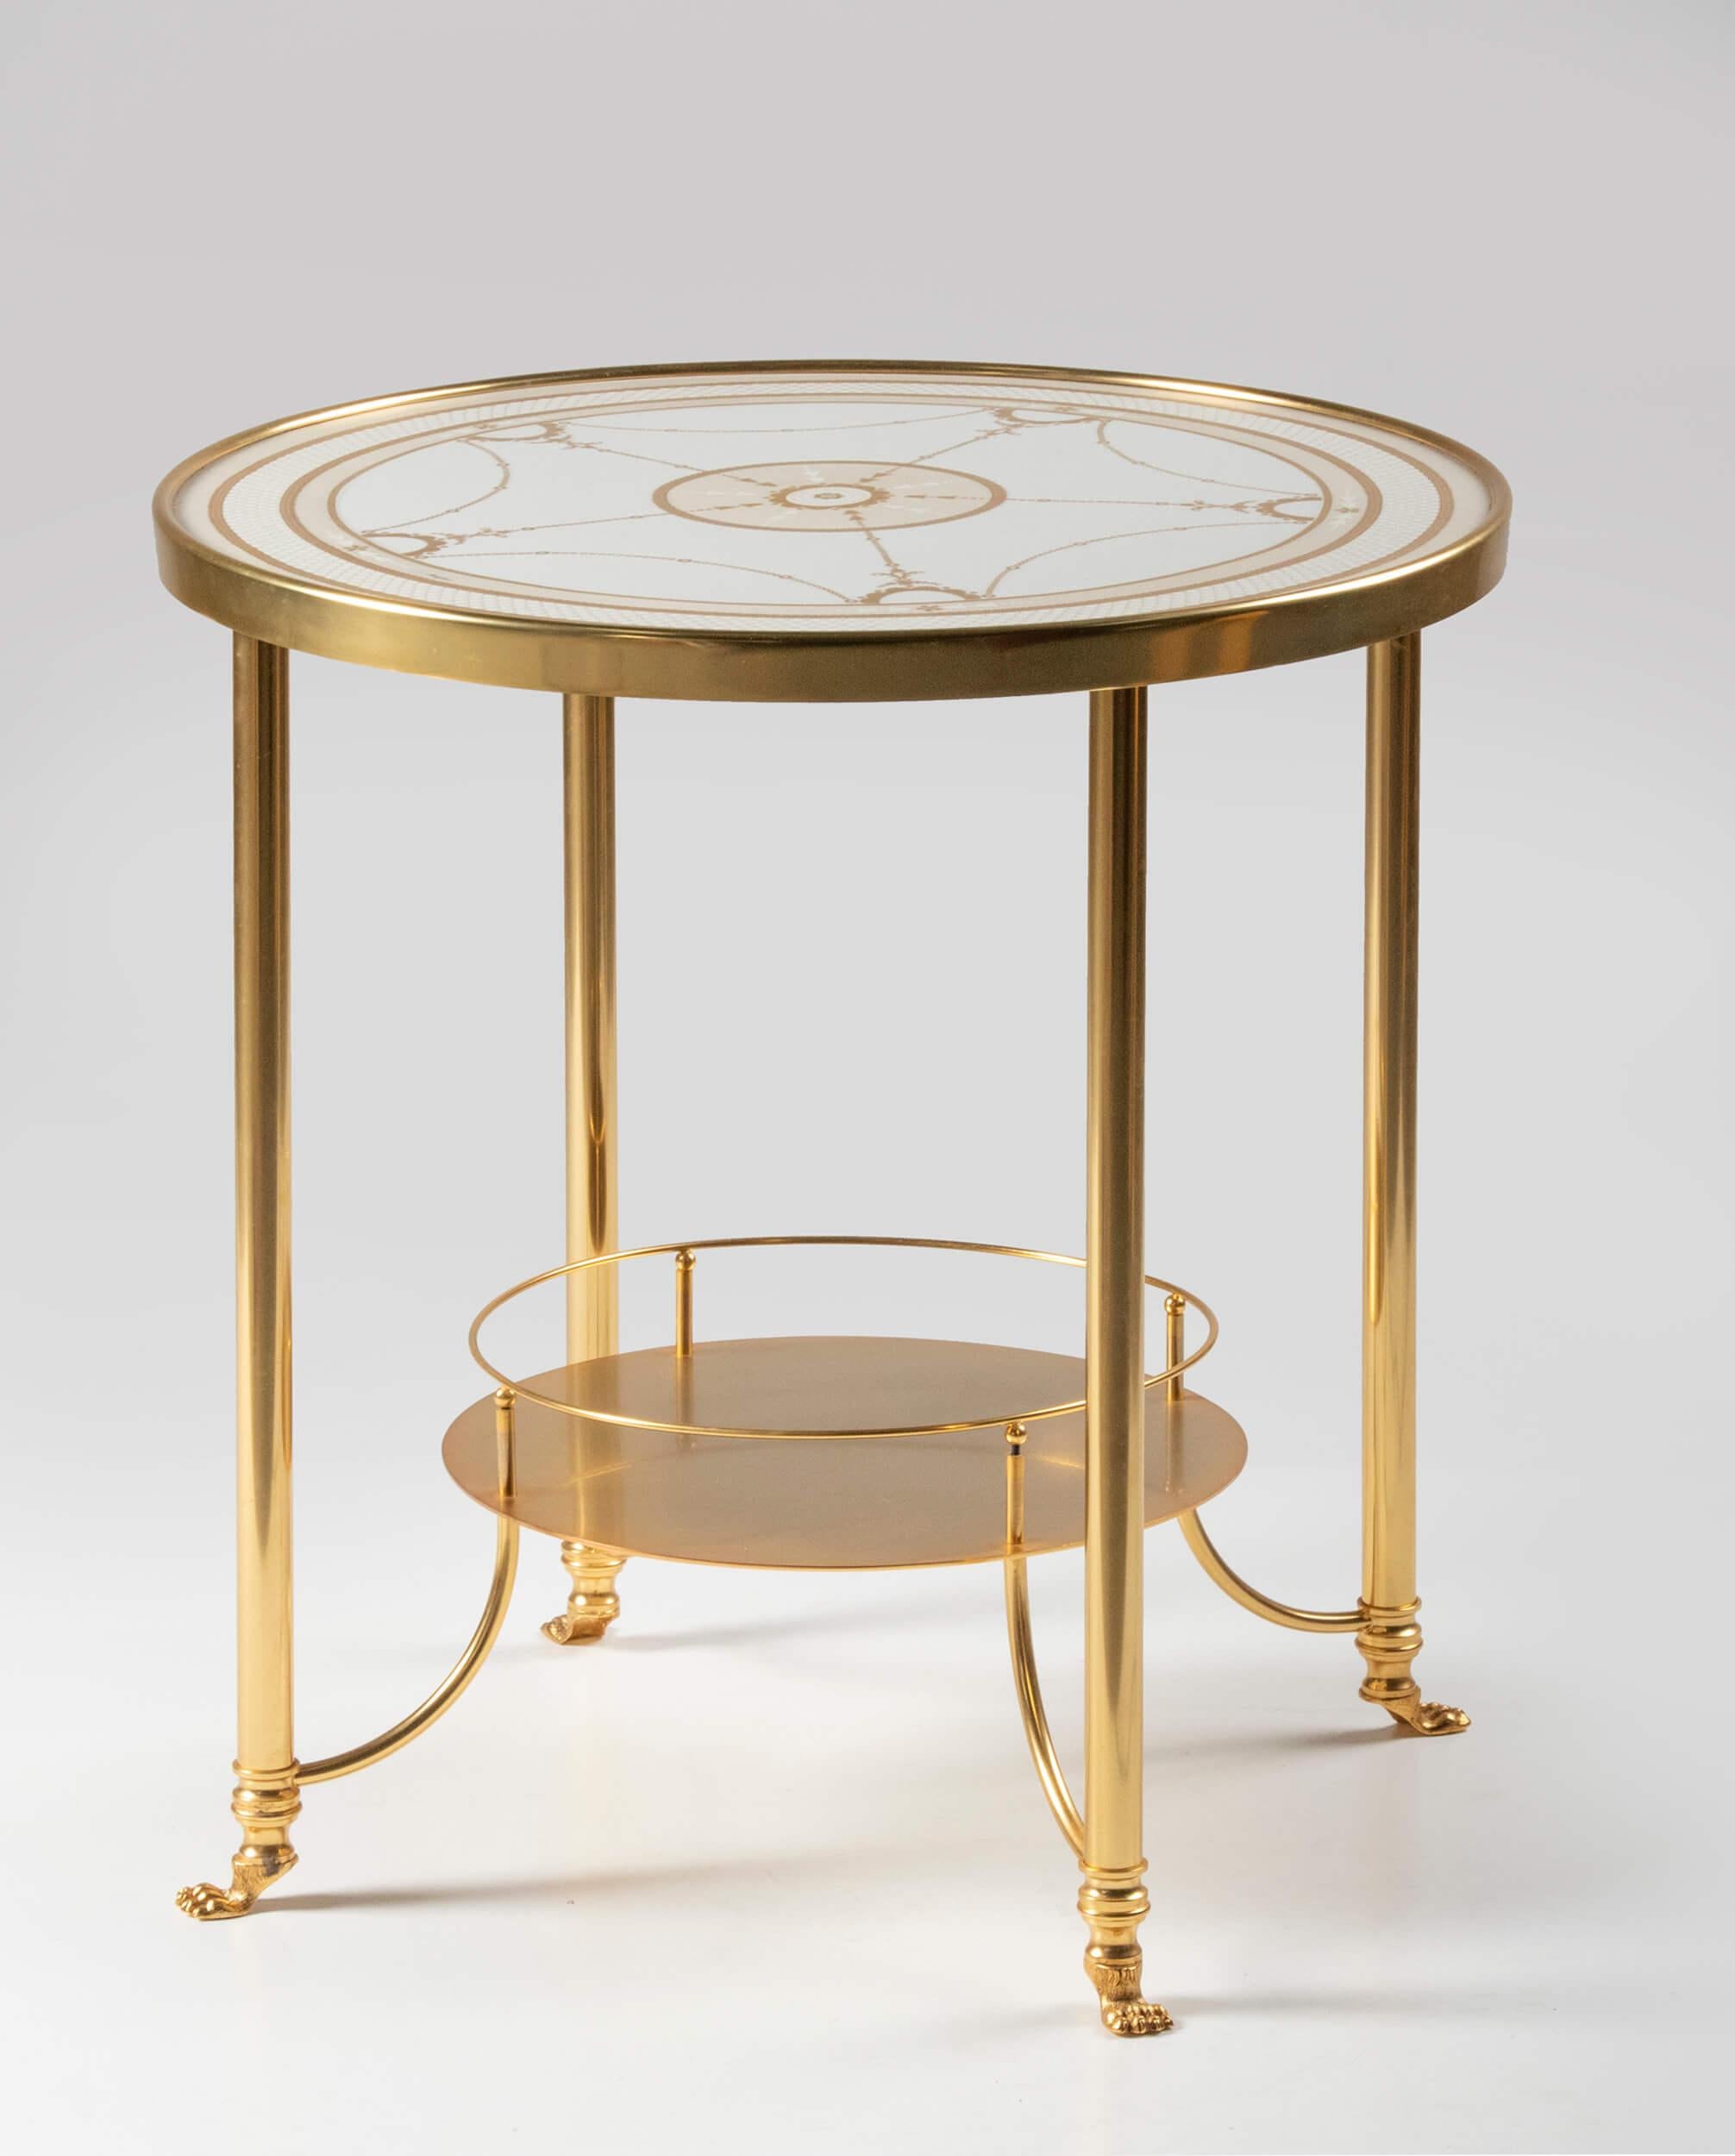 Beautiful round table from the Italian brand Giulia Mangani. The table is made of gold-colored brass, the top is made of porcelain, with a beautiful hand painted decoration. The table is elegant and chic, with beautiful, refined details.
The table